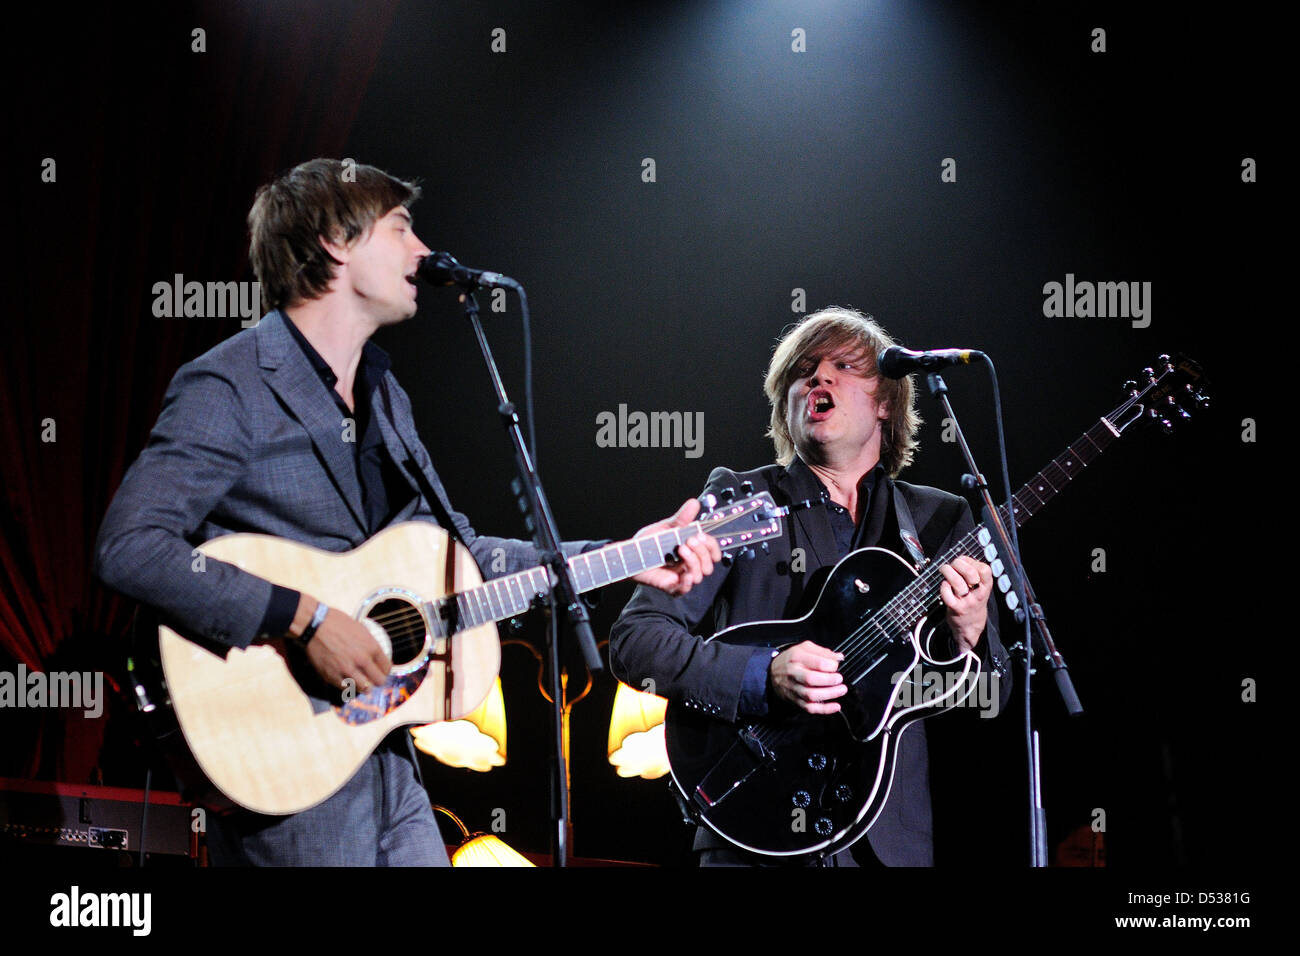 SANTANDER, SPAIN - JULY 22: Bjorn Dixgard (right) and Gustaf Norén (left), singers and guitarists of Mando Diao. Stock Photo